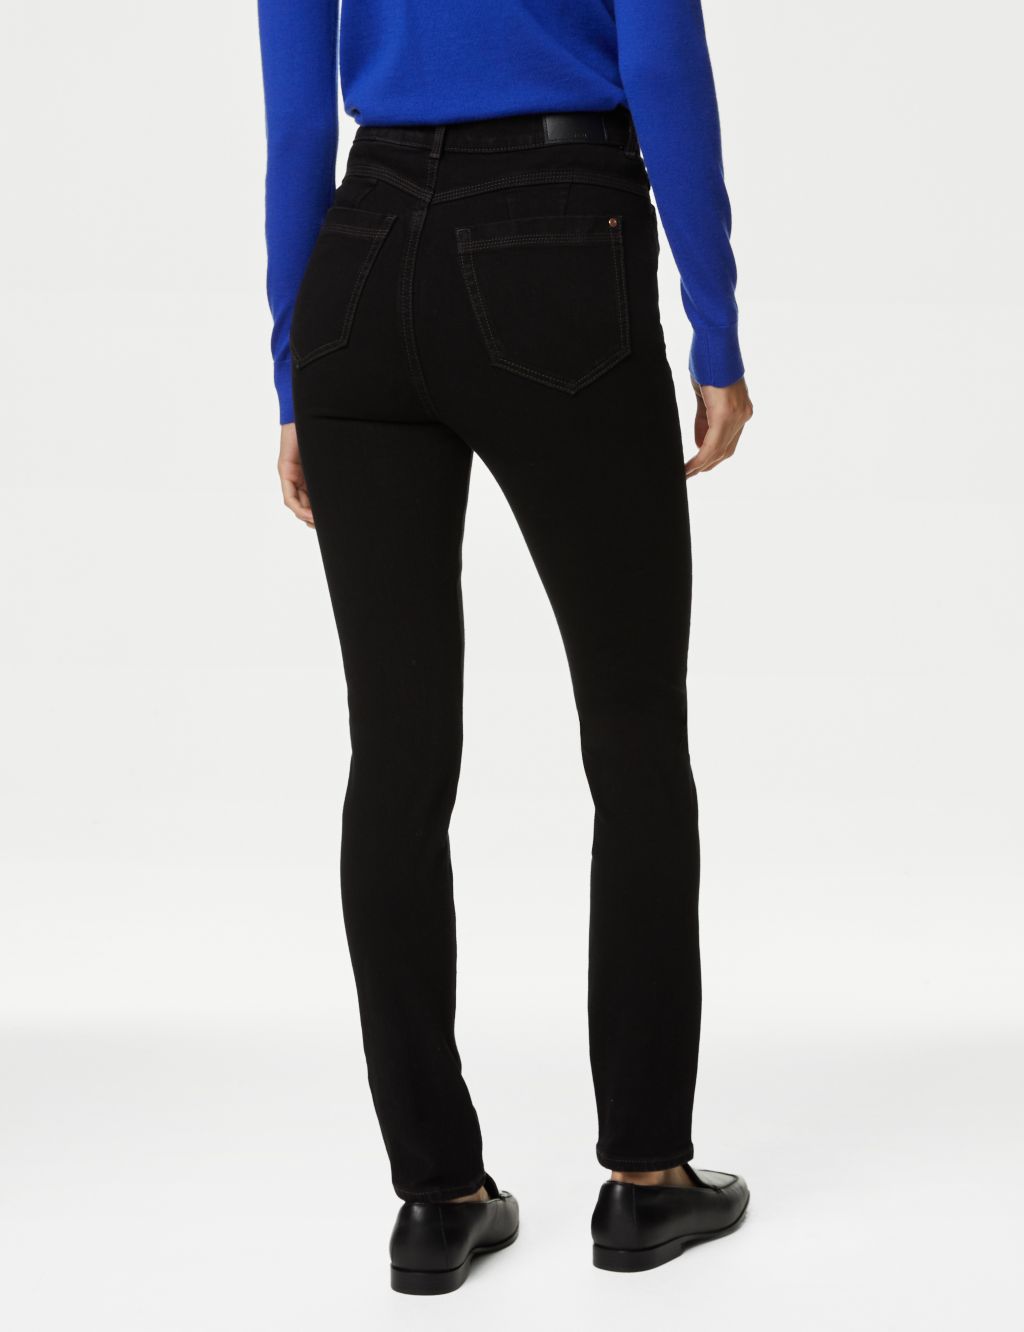 Magic Shaping High Waisted Skinny Jeans image 4